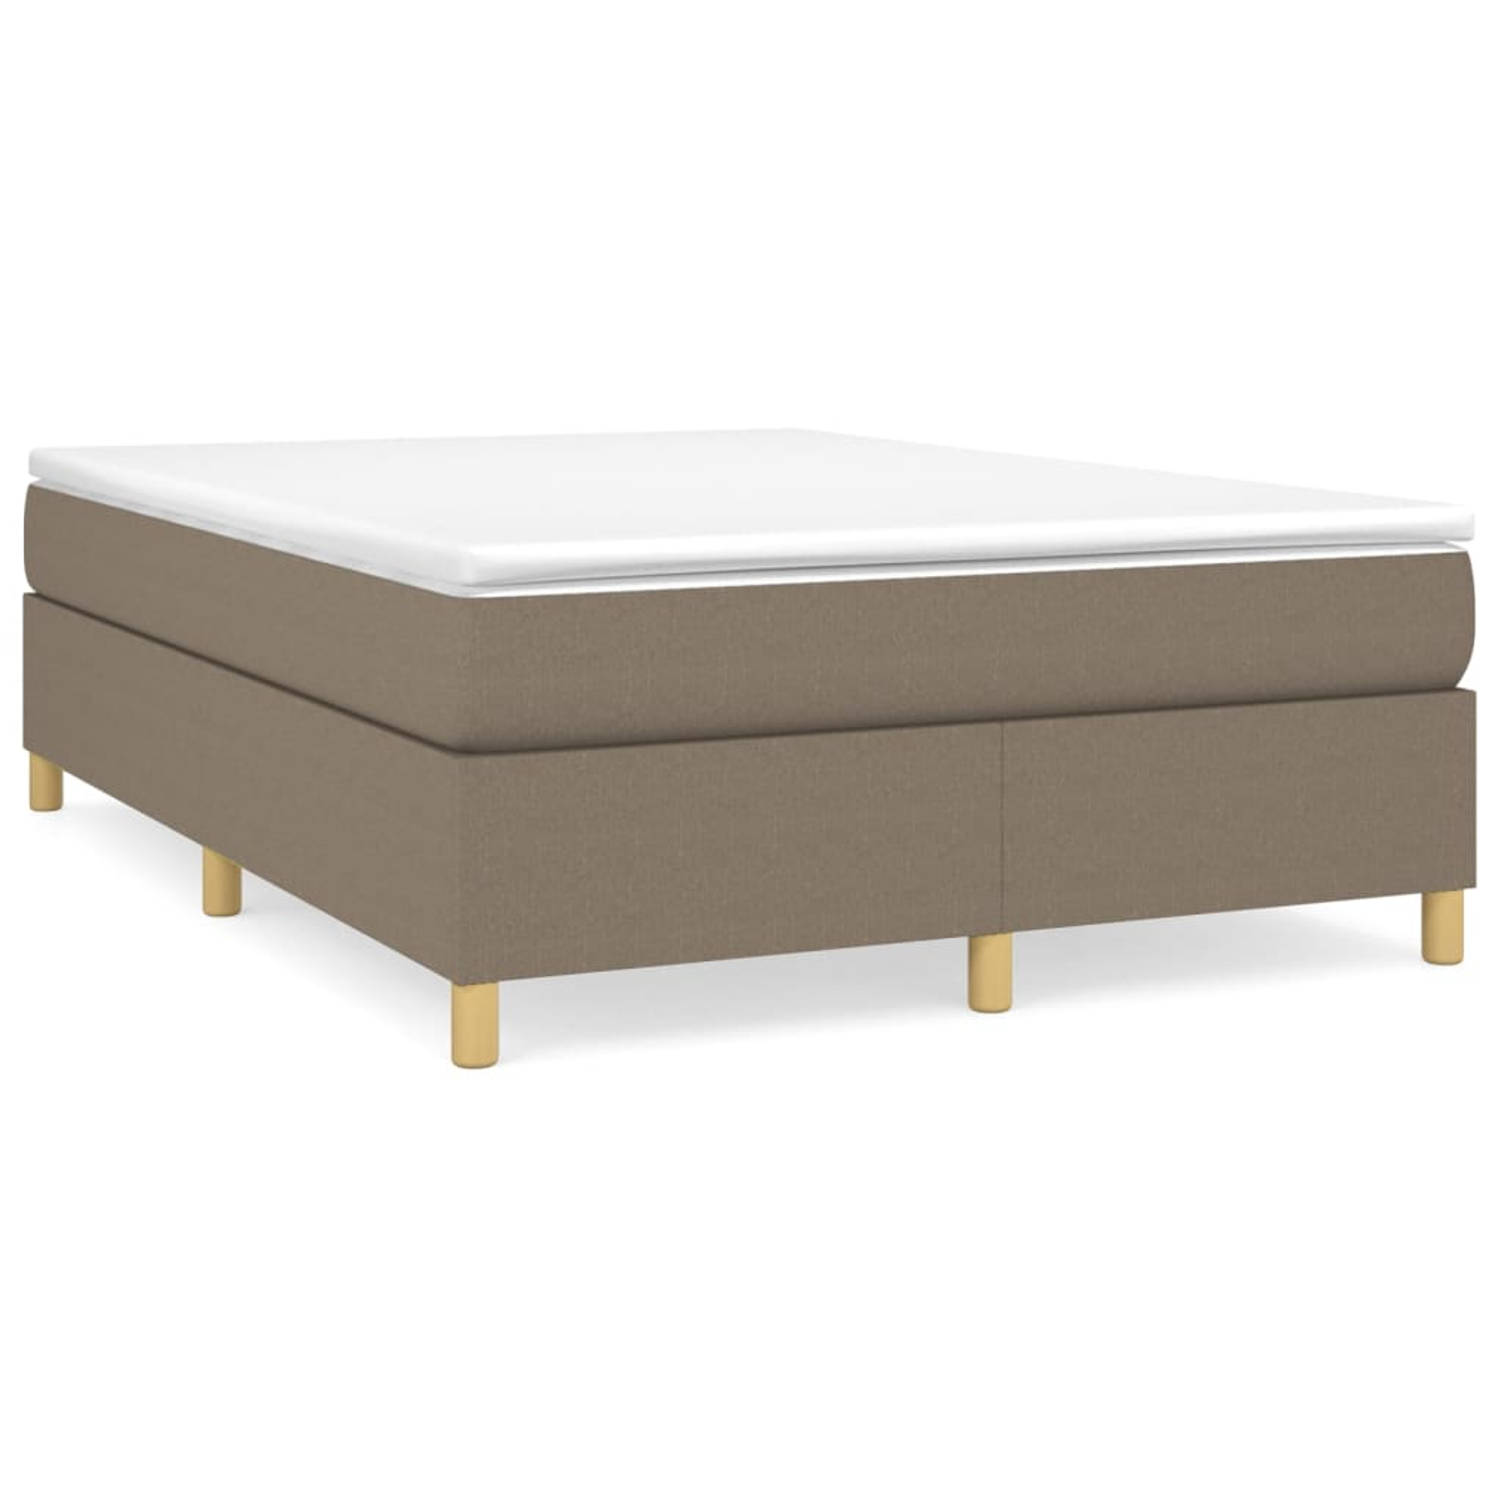 The Living Store Boxspringframe stof taupe 140x200 cm - Boxspringframe - Boxspringframes - Bed - Ledikant - Slaapmeubel - Bedframe - Bedbodem - Tweepersoonsbed - Boxspring - Bedden